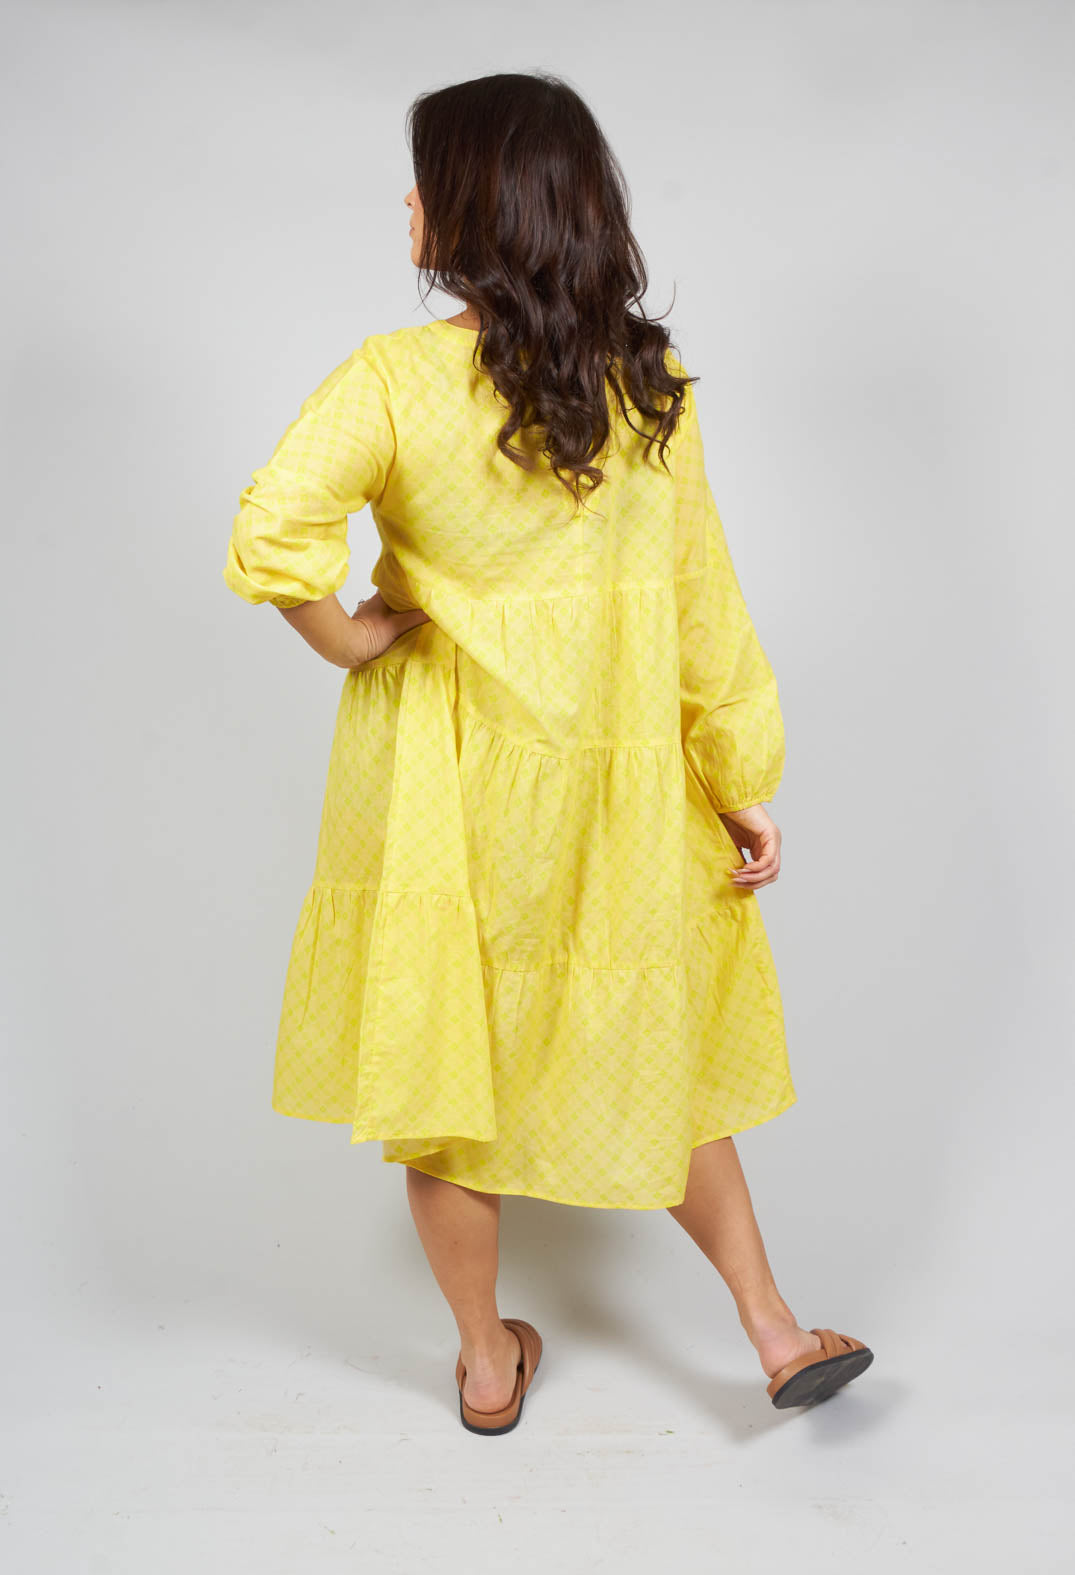 Tiered Tiny Dancer Dress with Yellow Print